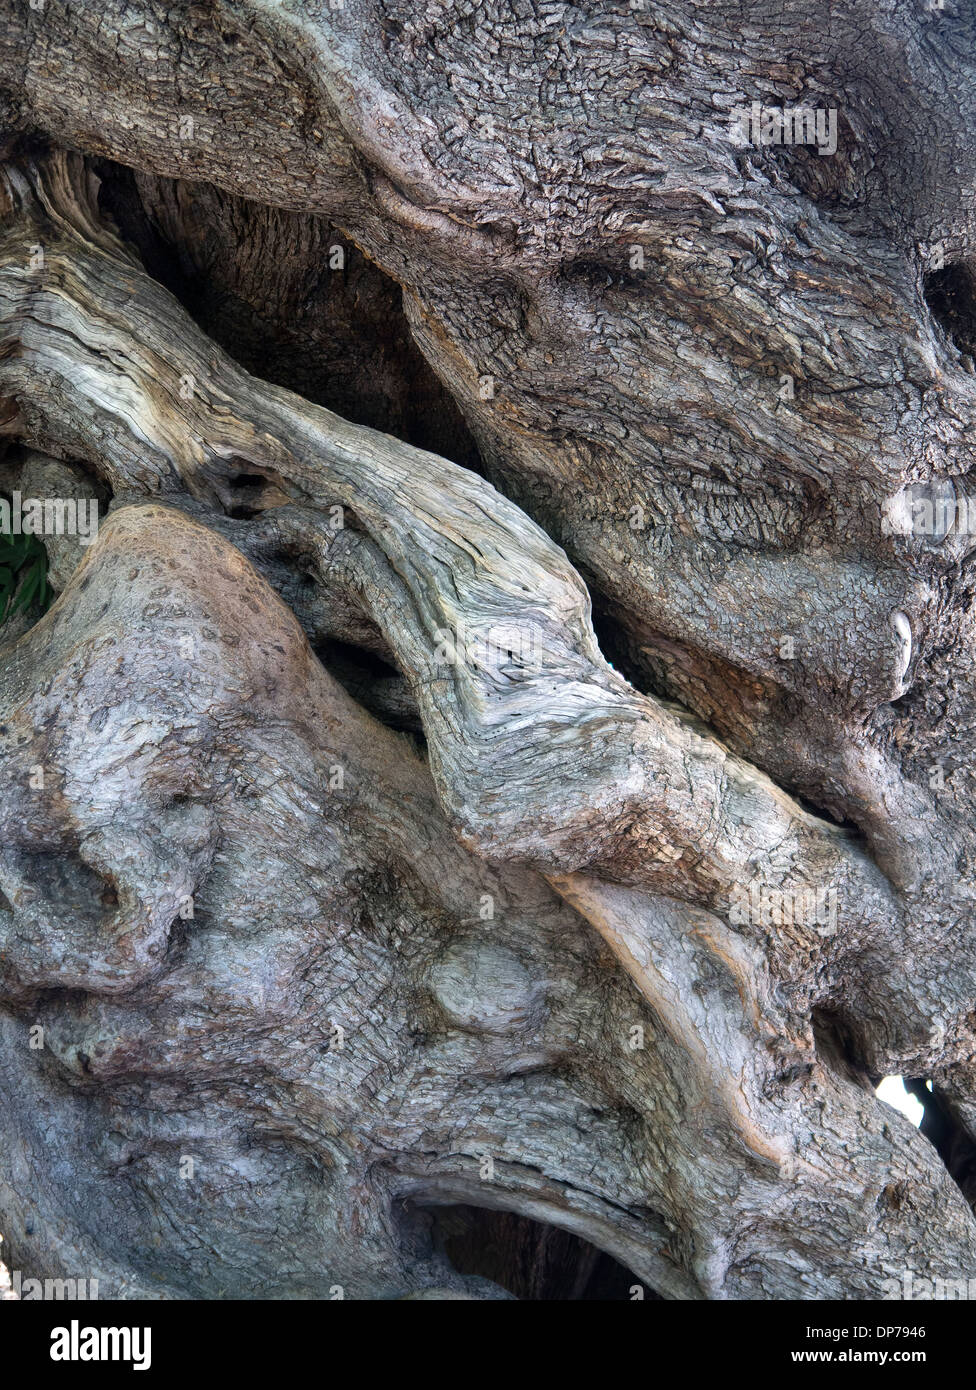 Gnarled old olive tree trunk known as the Cort Olive Stock Photo